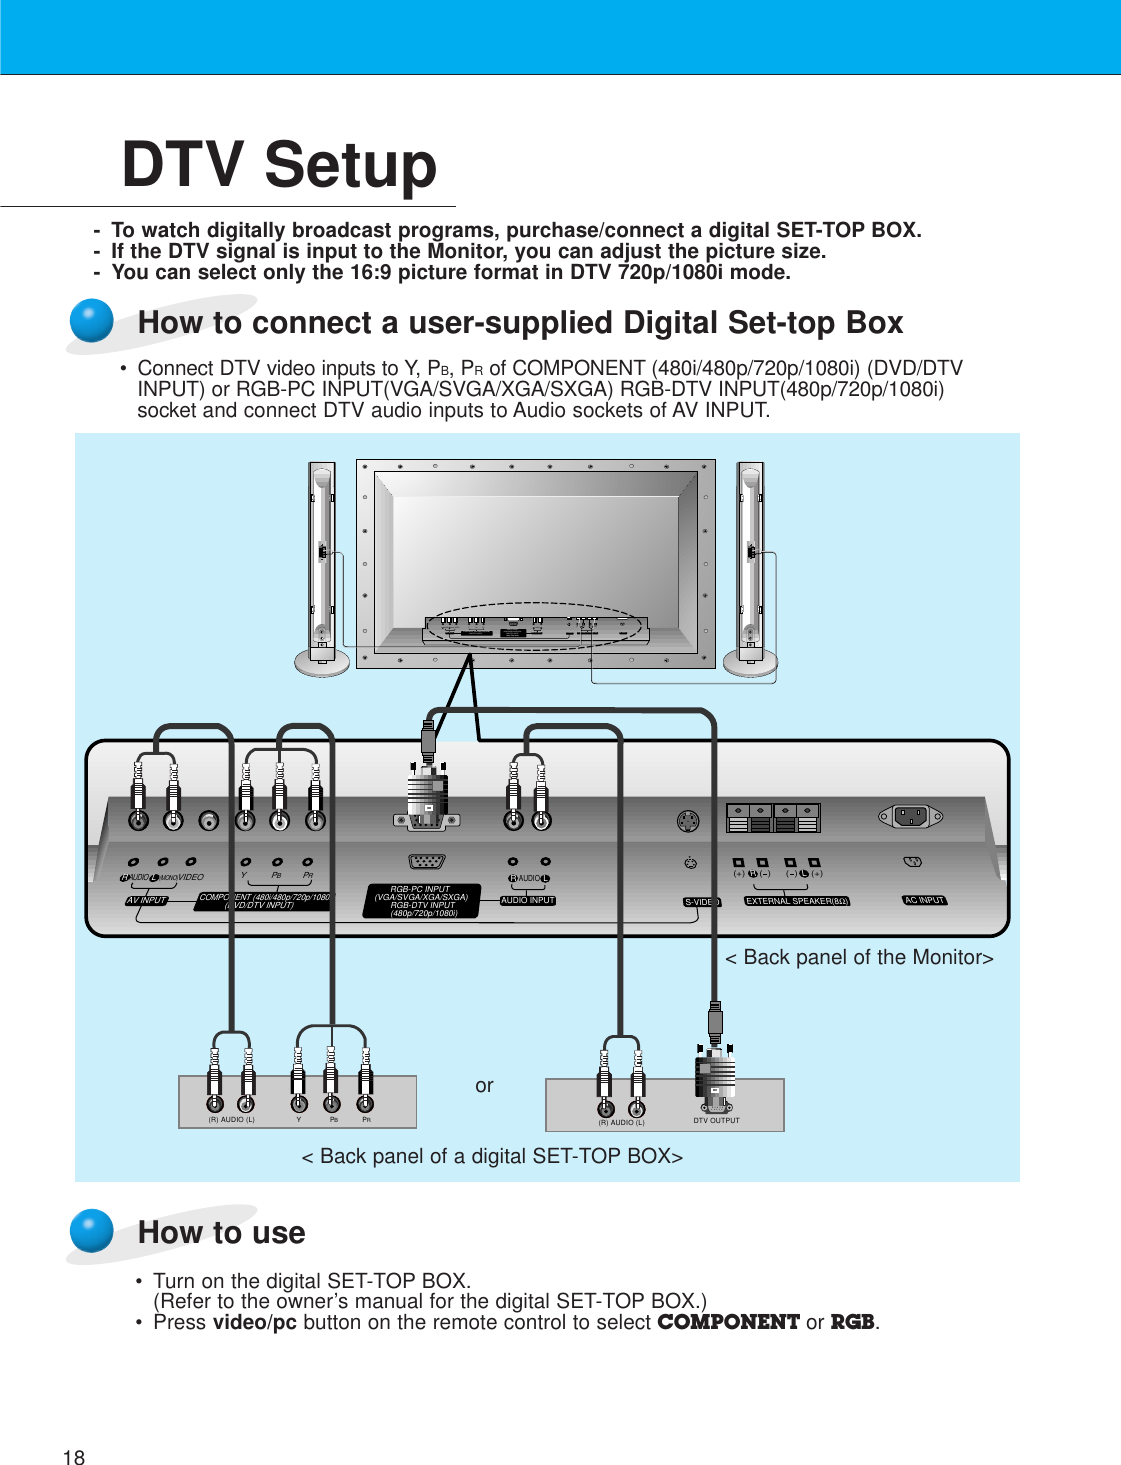 18DTV Setup- To watch digitally broadcast programs, purchase/connect a digital SET-TOP BOX.- If the DTV signal is input to the Monitor, you can adjust the picture size. - You can select only the 16:9 picture format in DTV 720p/1080i mode.How to connect a user-supplied Digital Set-top BoxHow to use(R) AUDIO (L)(R) AUDIO (L) Y PB RPDTV OUTPUT(+) (  ) (+)(  )AUDIO(MONO)R L VIDEO Y PB RPAV INPUTAUDIOR L RLEXTERNAL SPEAKER (8Ω) AC INPUTAUDIO INPUT S-VIDEOCOMPONENT (480i/480p/720p/1080i) RGB-PC INPUT(VGA/SVGA/XGA/SXGA)RGB-DTV INPUT(480p/720p/1080i)(DVD/DTV INPUT)(+) (  ) (+)(  )AUDIO(MONO)R LAV INPUTCOMPONENT (480i/480p/720p/1080i)(DVD/DTV INPUT)RGB-PC INPUTRAUDIO INPUTS-VIDEOEXTERNAL SPEAKER(8Ω)R LAC INPUTLAUDIO(VGA/SVGA/XGA/SXGA)RGB-DTV INPUT(480p/720p/1080i)VIDEO Y PBPR• Turn on the digital SET-TOP BOX.(Refer to the owner’s manual for the digital SET-TOP BOX.)• Press video/pc button on the remote control to select COMPONENT or RGB.&lt; Back panel of a digital SET-TOP BOX&gt;or•Connect DTV video inputs to Y, PB, PRof COMPONENT (480i/480p/720p/1080i) (DVD/DTVINPUT) or RGB-PC INPUT(VGA/SVGA/XGA/SXGA) RGB-DTV INPUT(480p/720p/1080i)socket and connect DTV audio inputs to Audio sockets of AV INPUT.&lt; Back panel of the Monitor&gt;